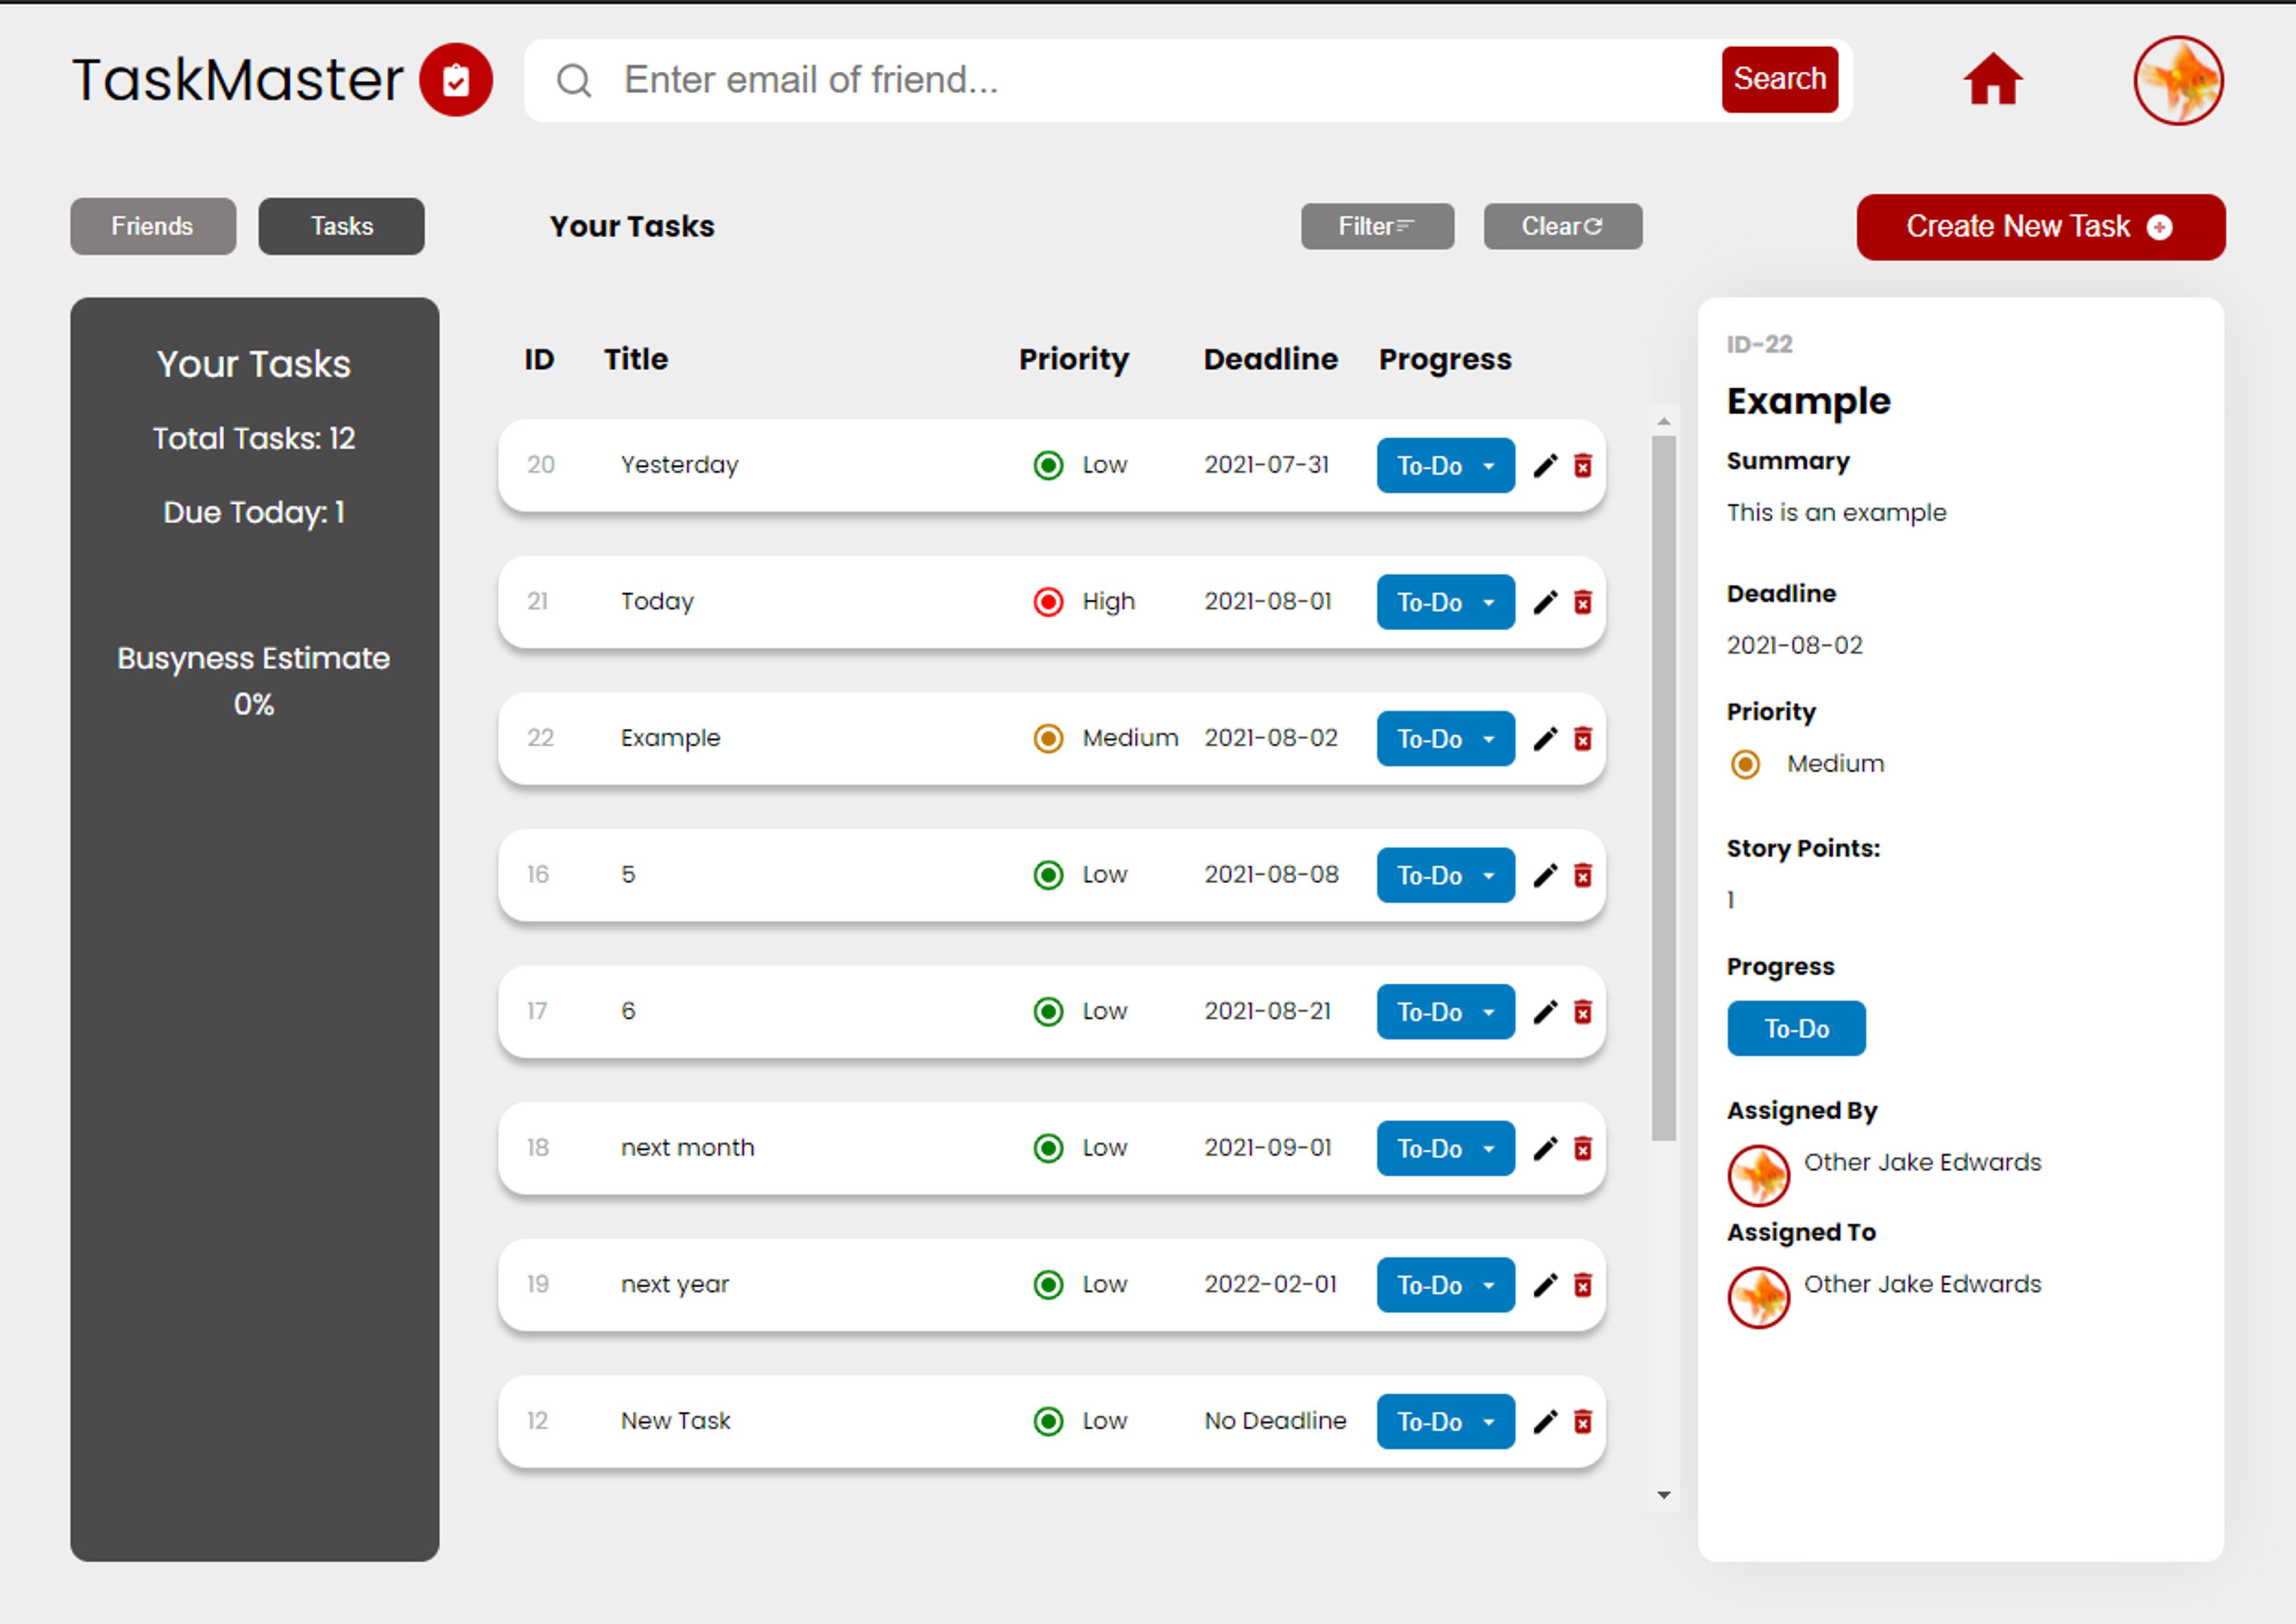 The Task Master dashboard that includes features such as the profile, tasks and friends.